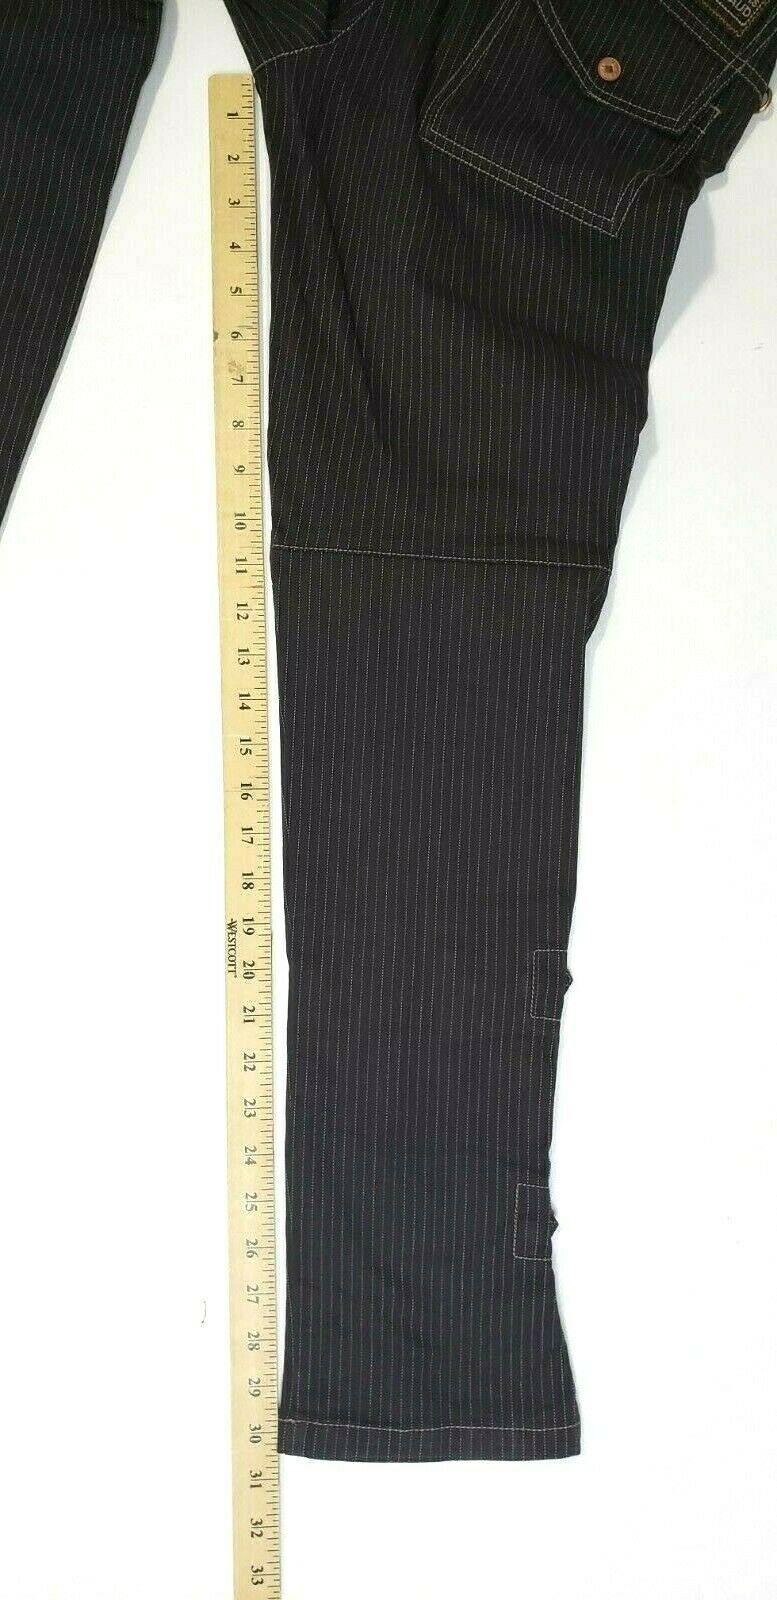 Marithe+Francois Girbaud Fashion Brown Striped Womens Pants Size 27 - SVNYFancy